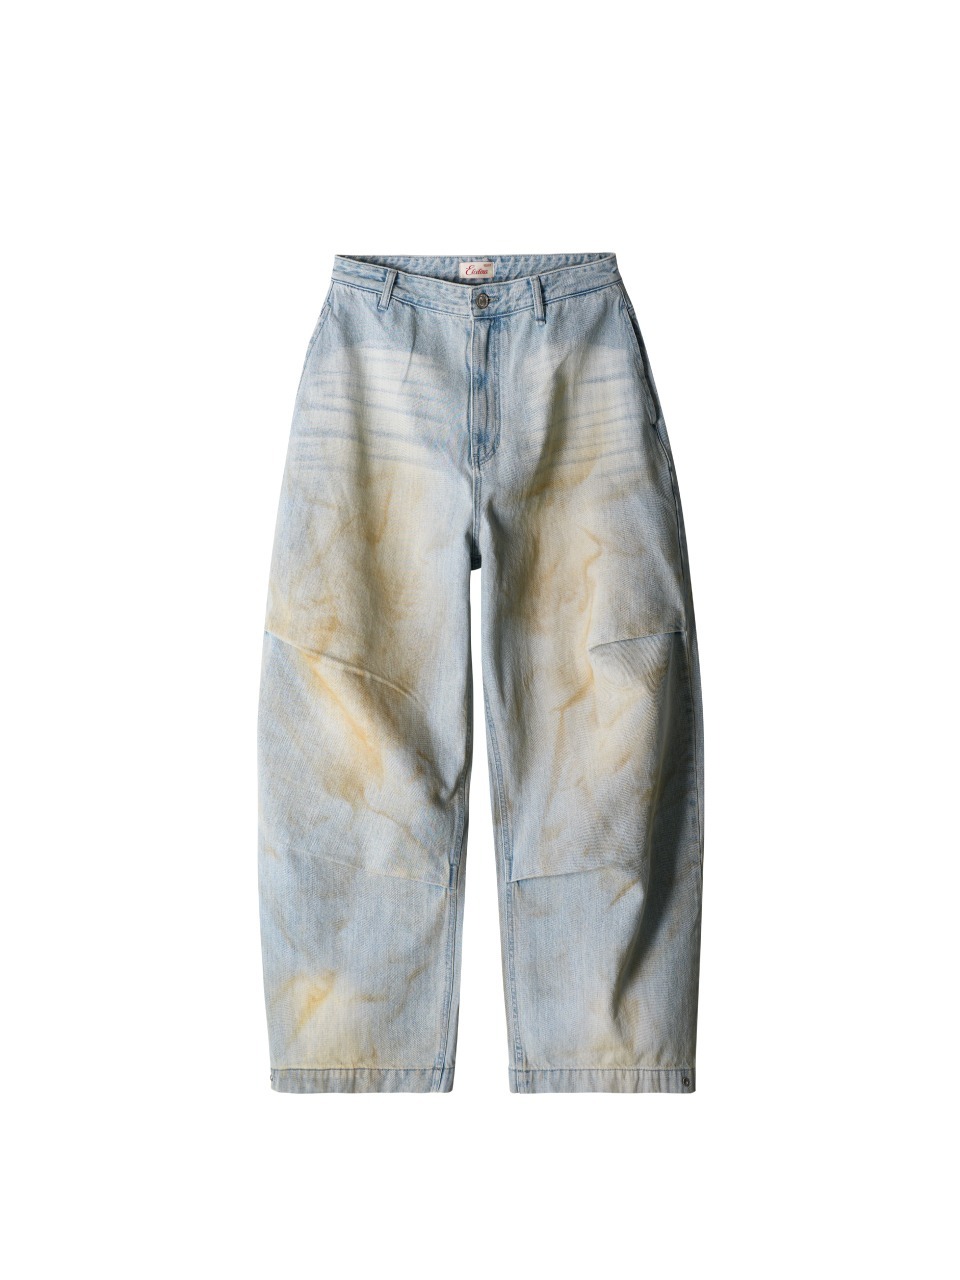 ETCE - OIL WASHED BAGGY JEAN (BLUE)